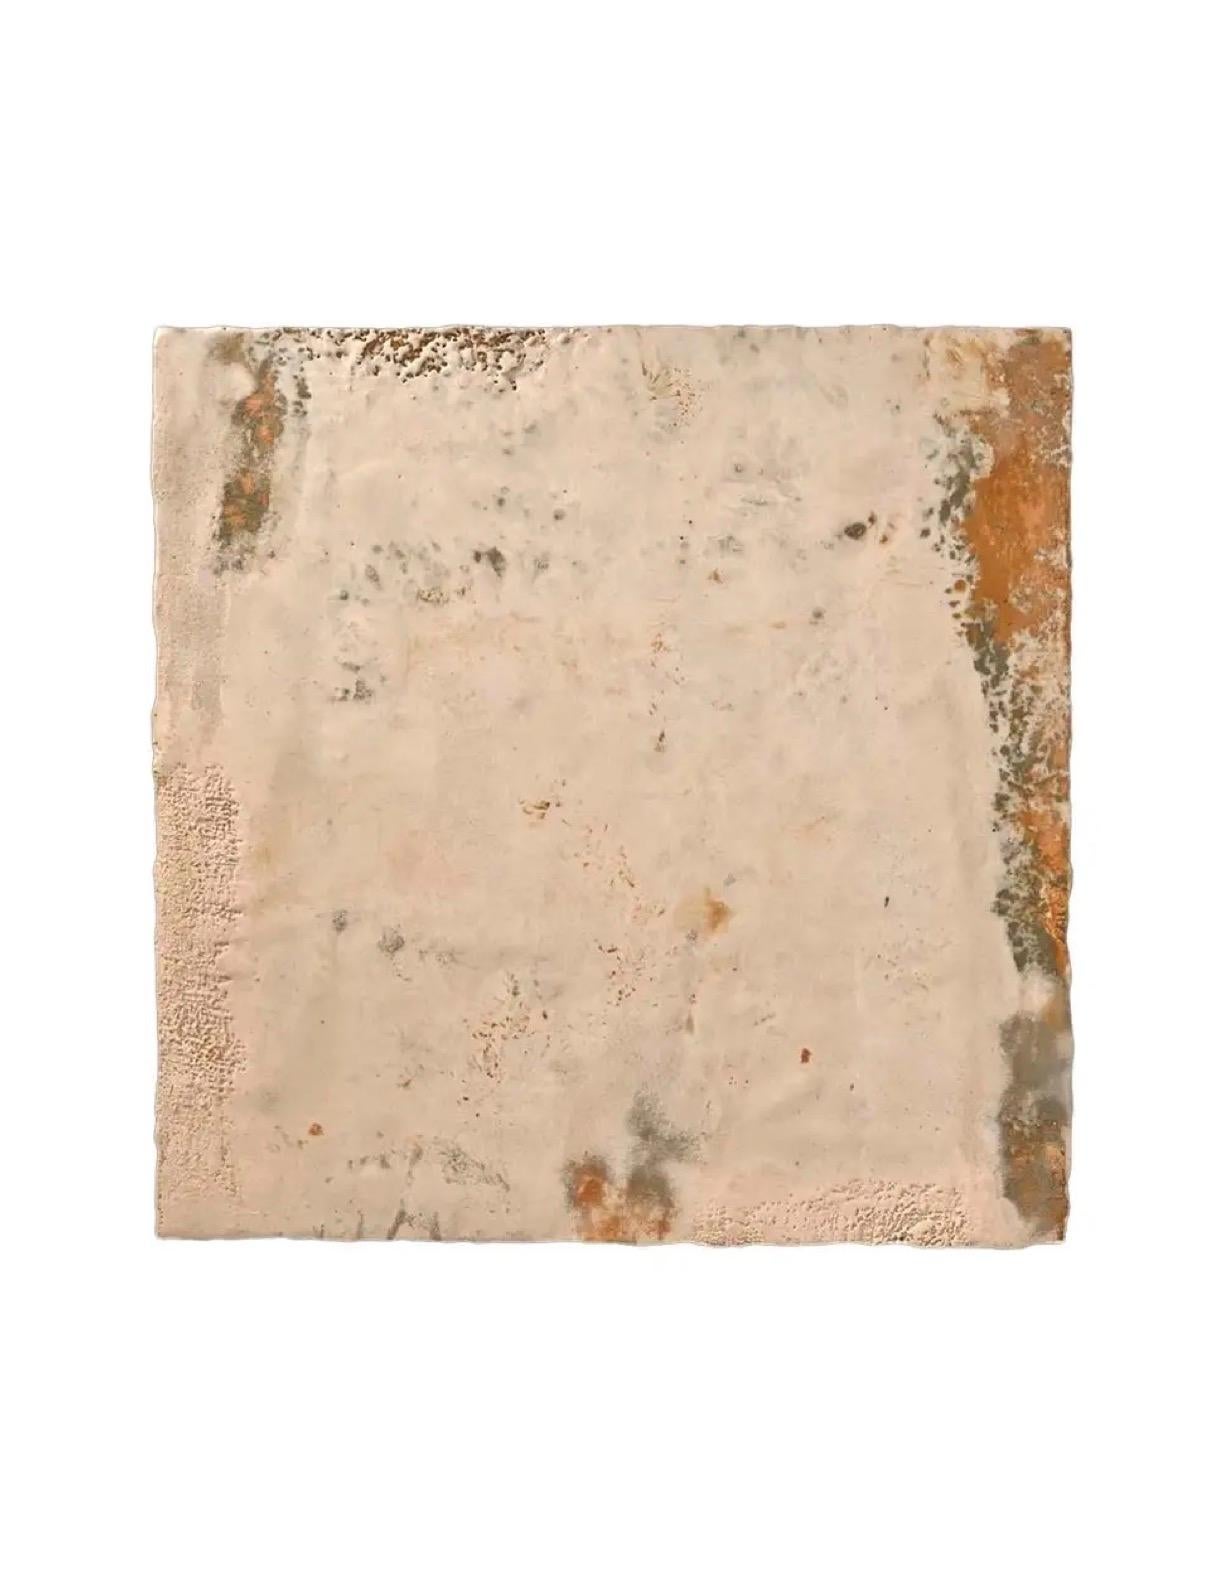 Modern Richard Hirsch Encaustic Painting of Nothing #10, 2011 For Sale